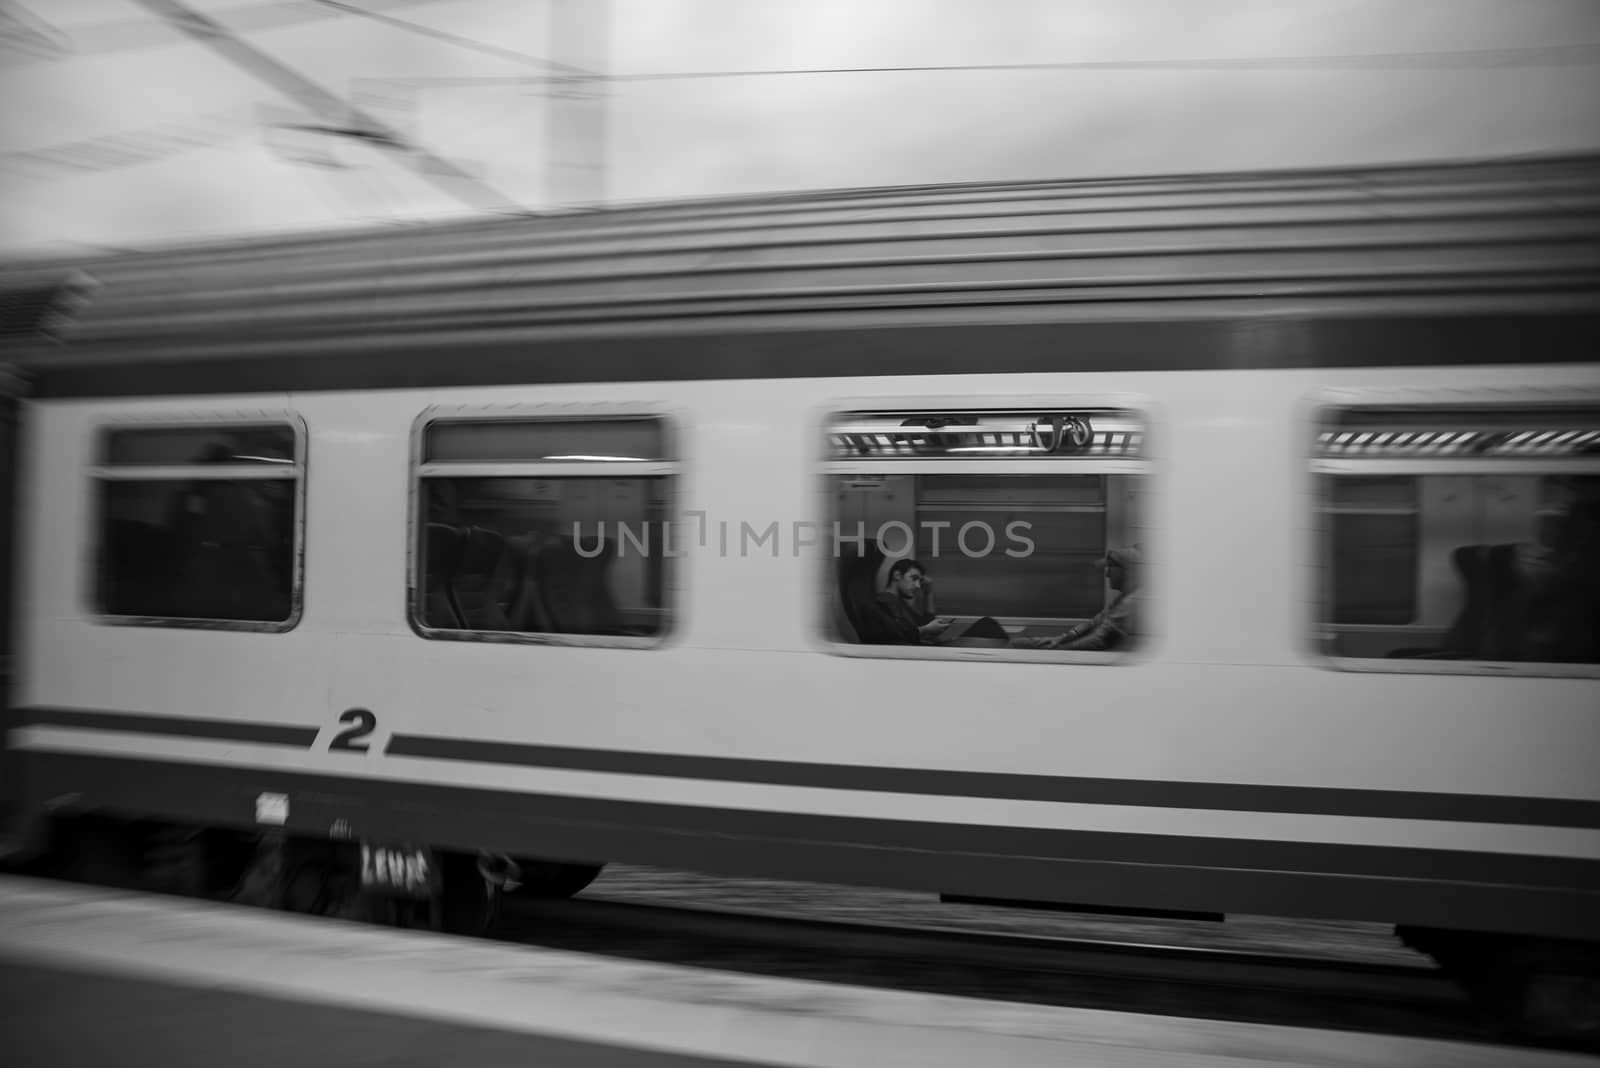 teni,italy may 28 2020 :panning trains at the station in speed with people inside